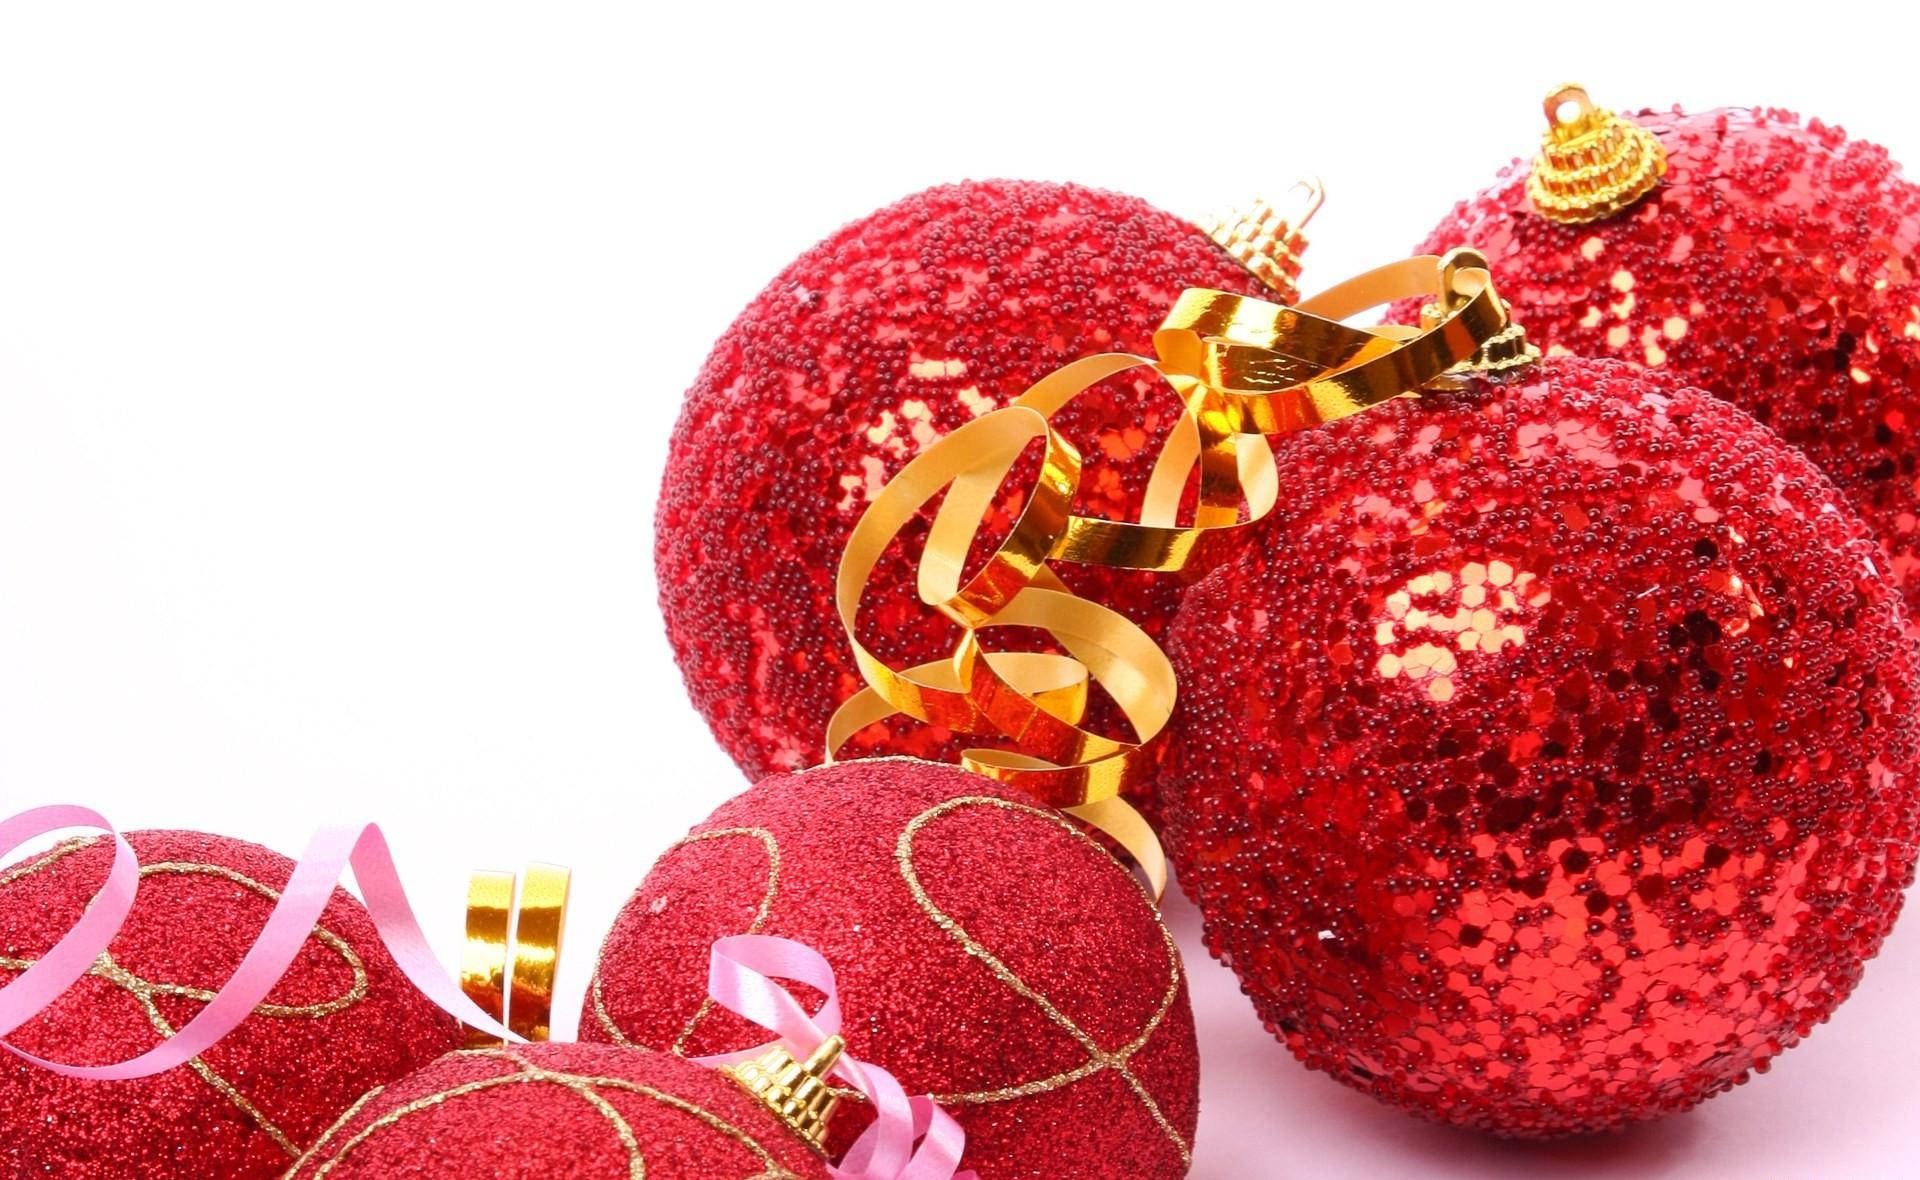 Glittery Red Christmas Ornaments Wallpaper